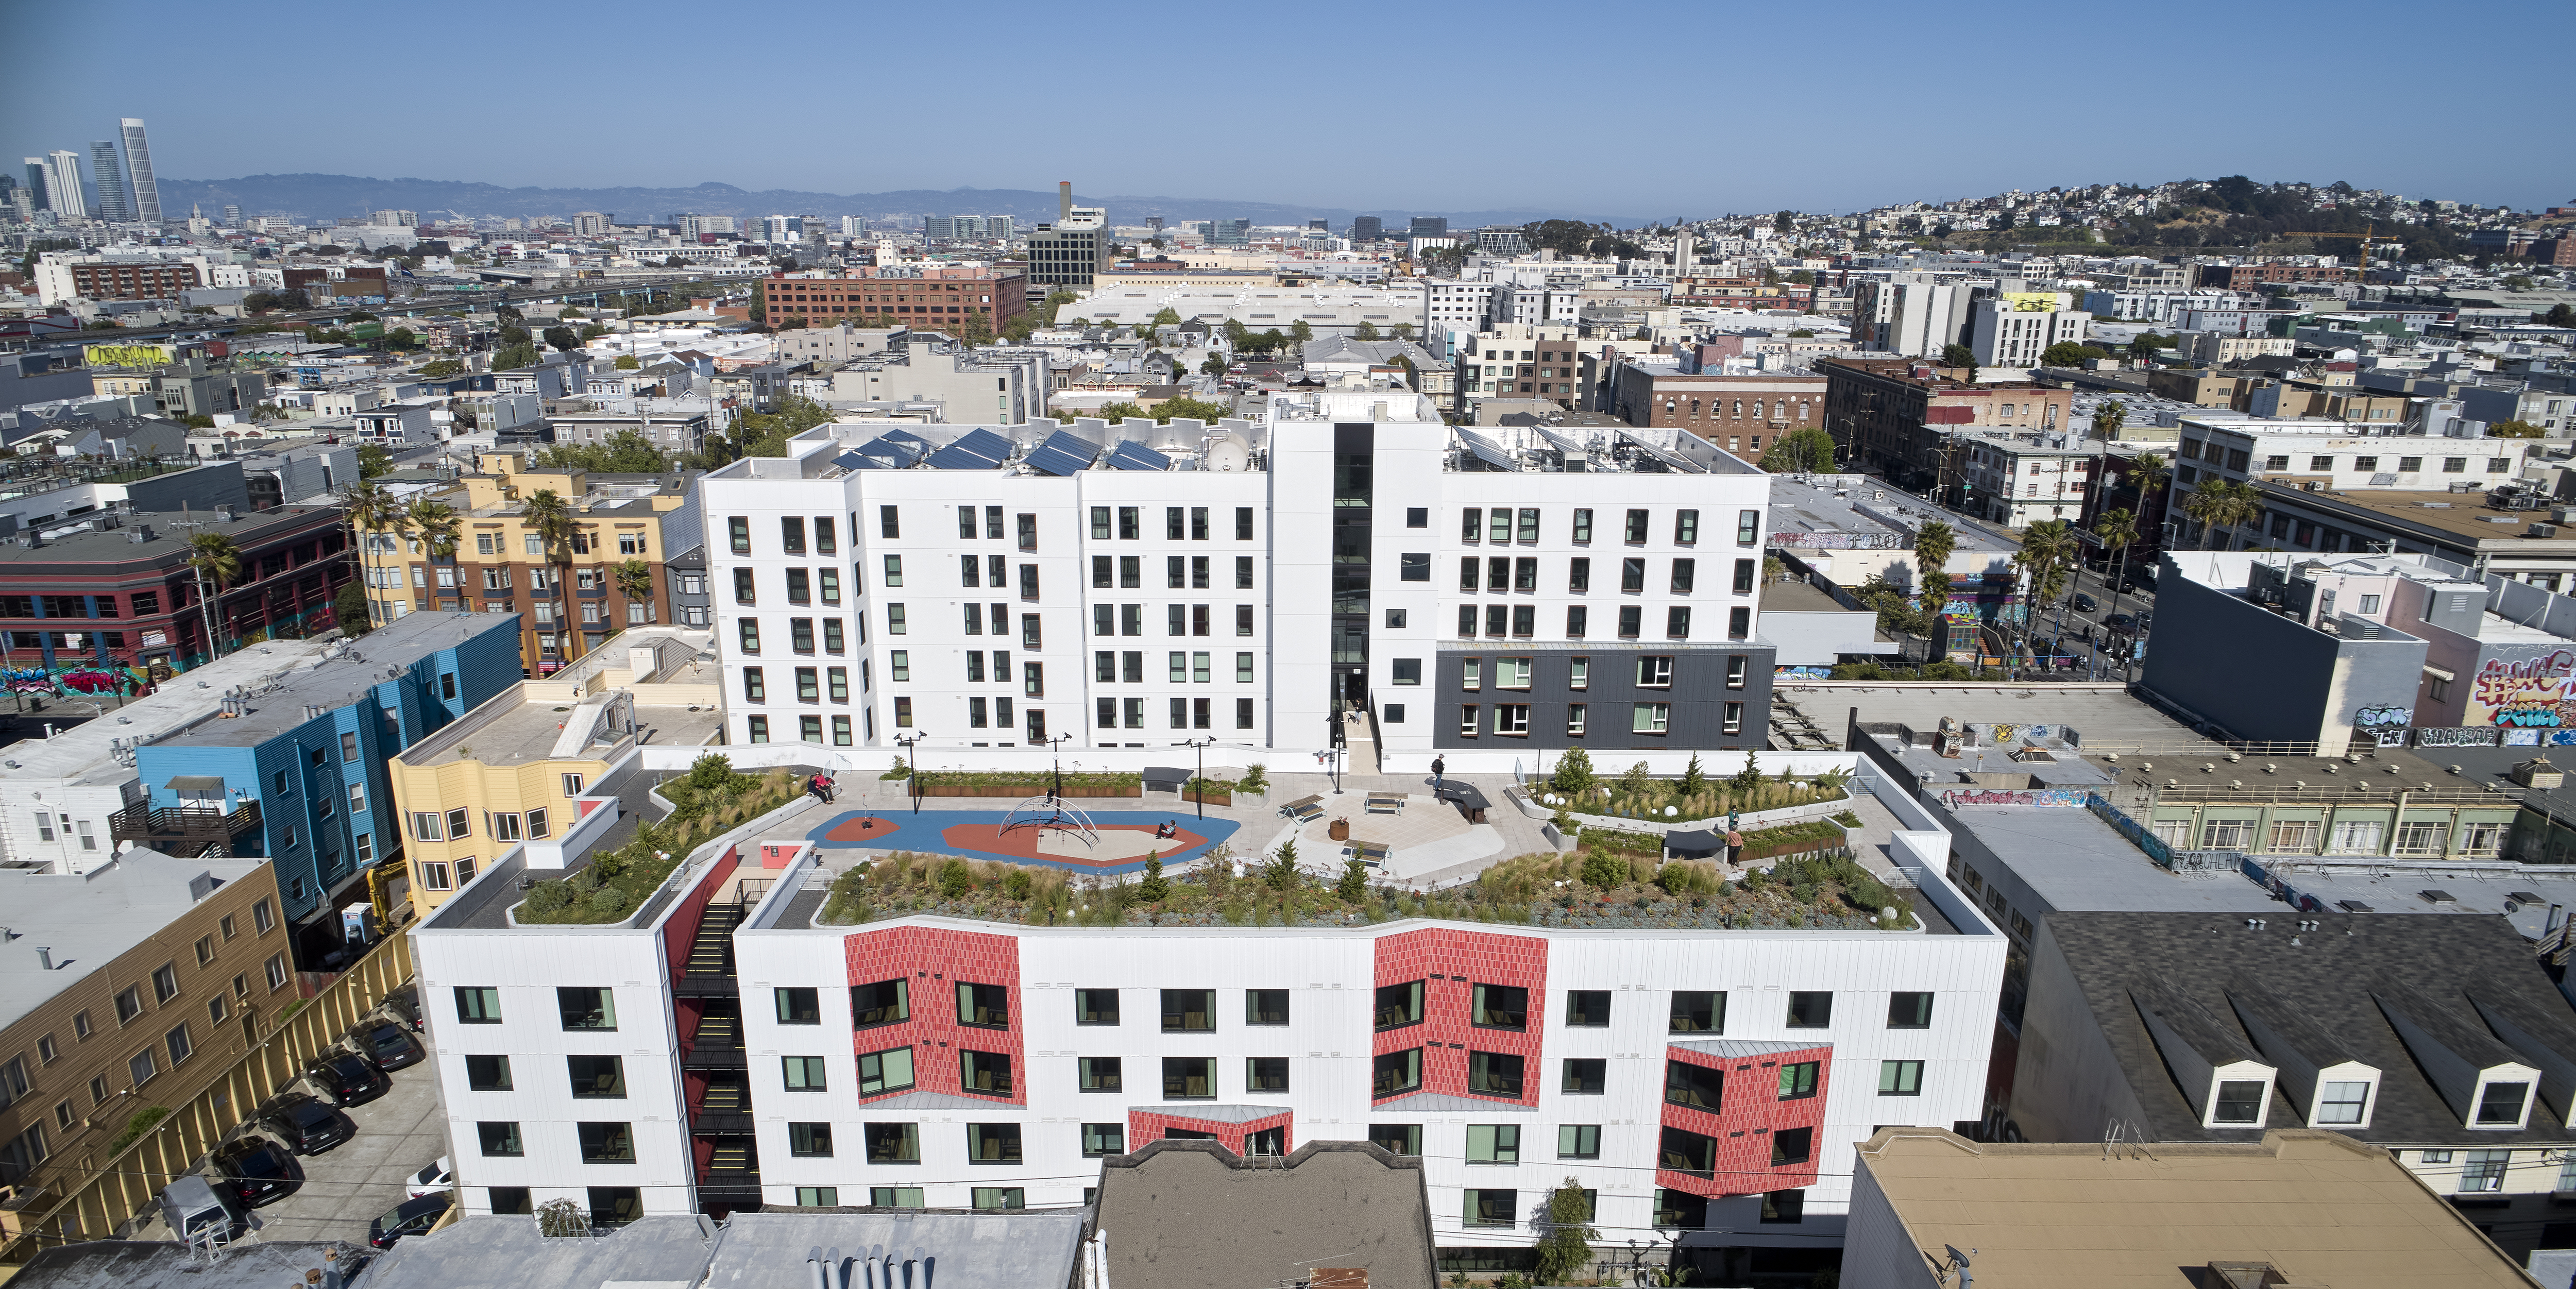 Aerial view of La Fénix at 1950, affordable housing in the mission district of San Francisco.